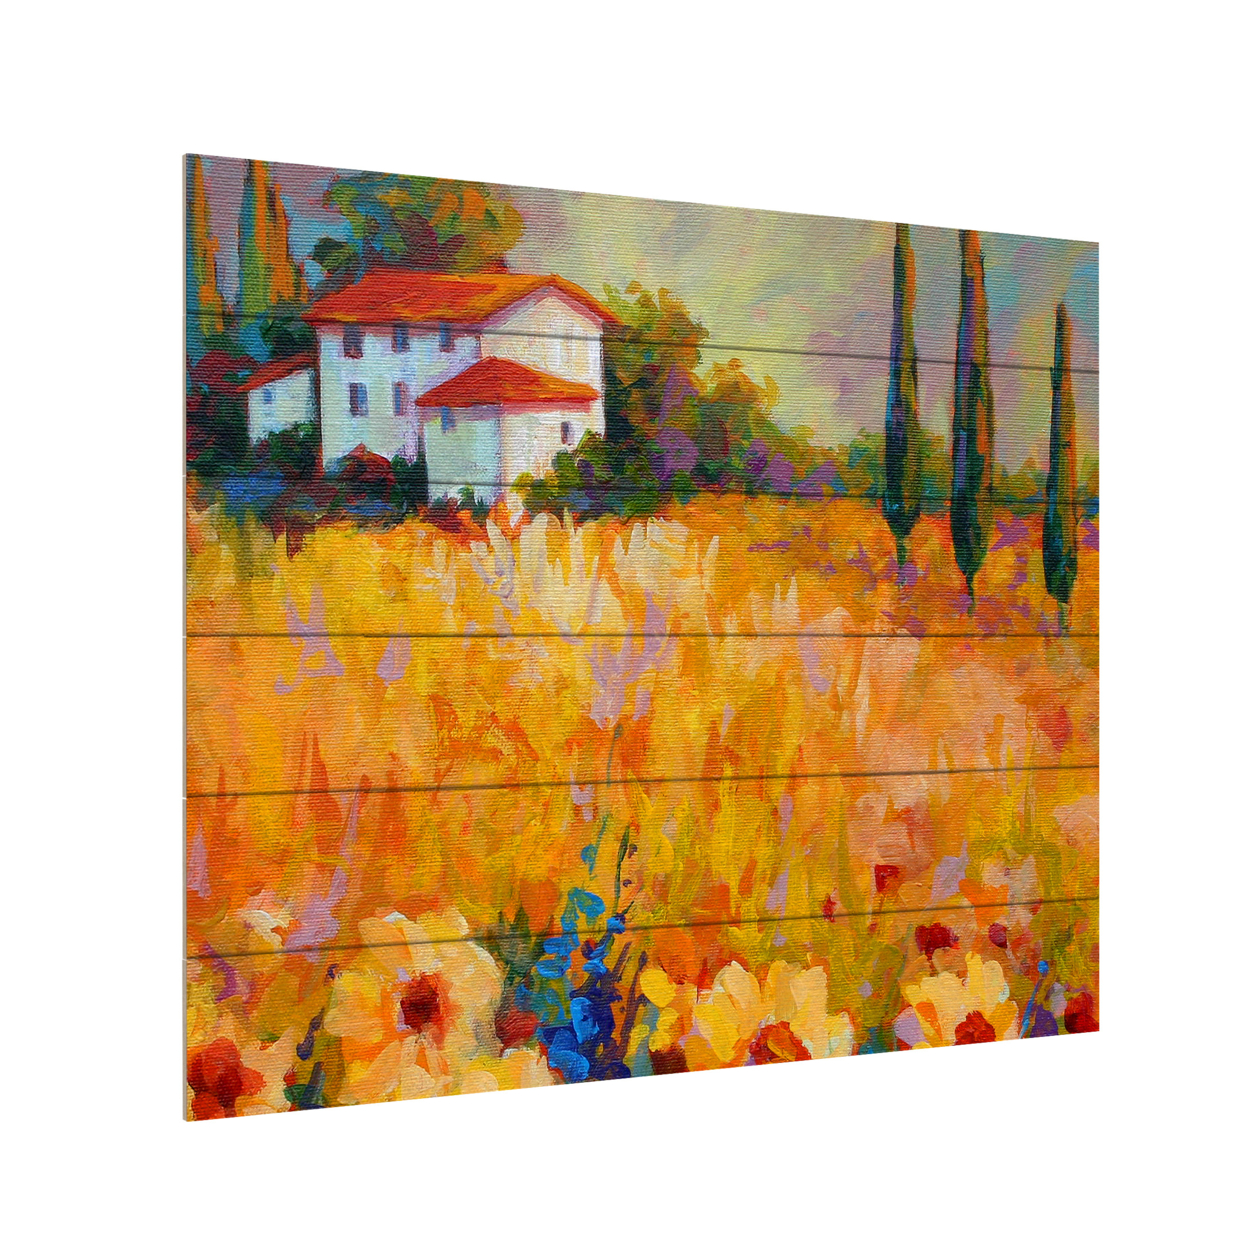 Wooden Slat Art 18 X 22 Inches Titled Tuscan Sunflowers Ready To Hang Home Decor Picture